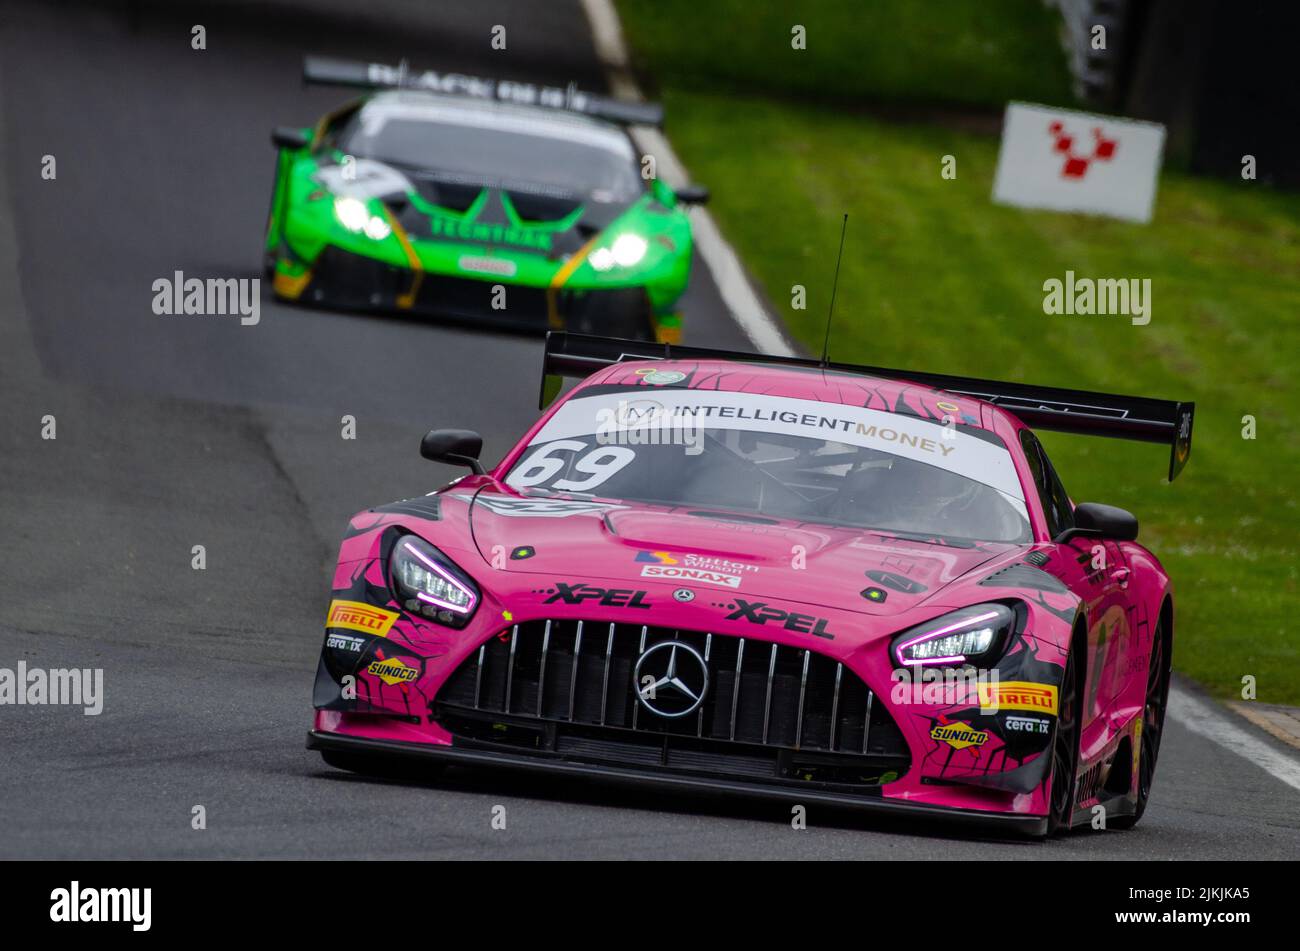 A low angle shot of a Mercedes-AMG GT3 pink car during the race in the British GT Championship, Stock Photo